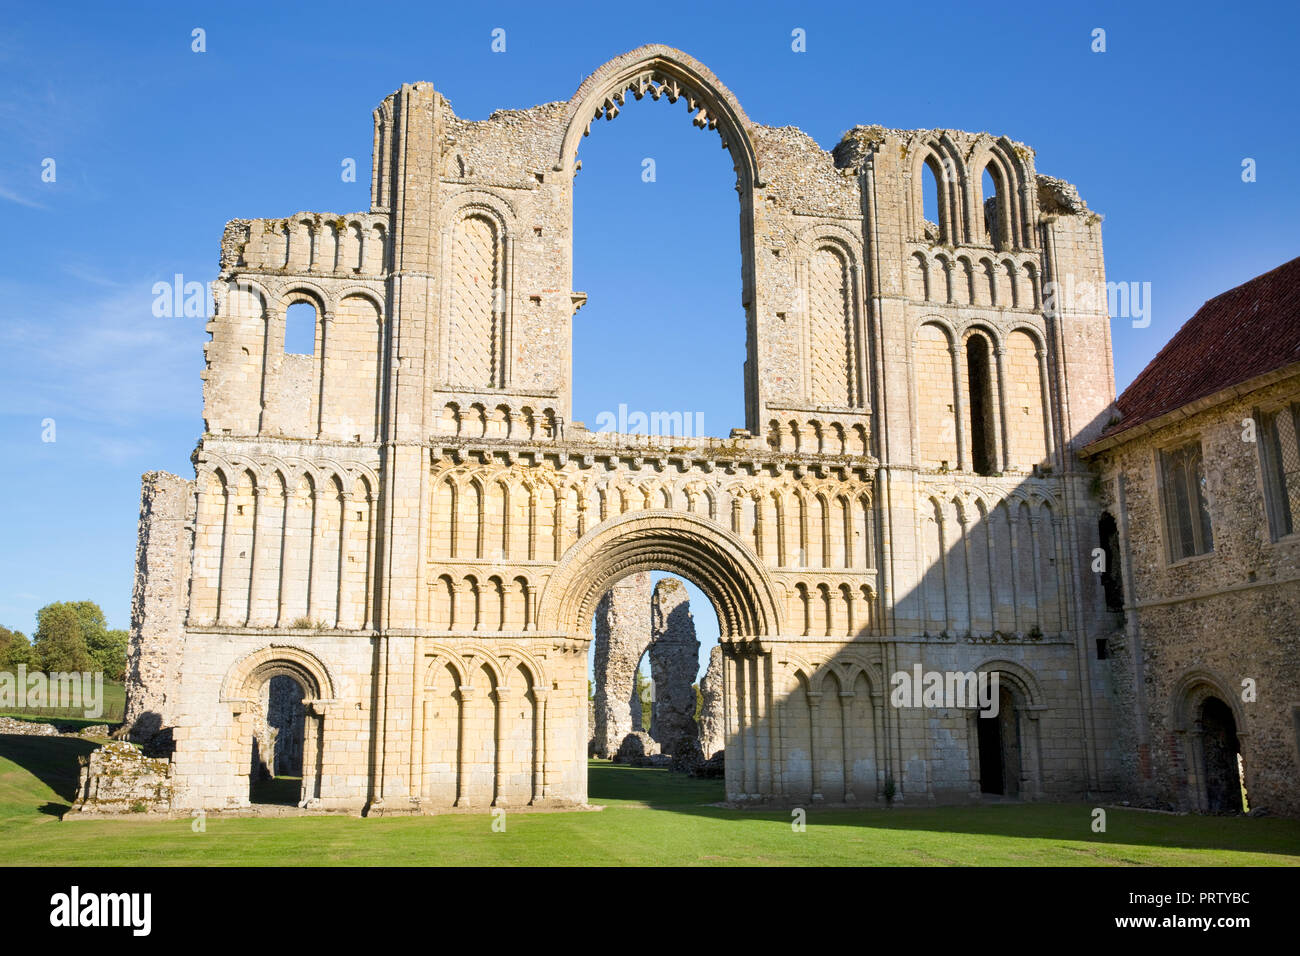 The remains of the West Front at Castle Acre Priory, Norfolk, United Kingdom. The Priory declined following the Suppression of the Monasteries in 1537 Stock Photo